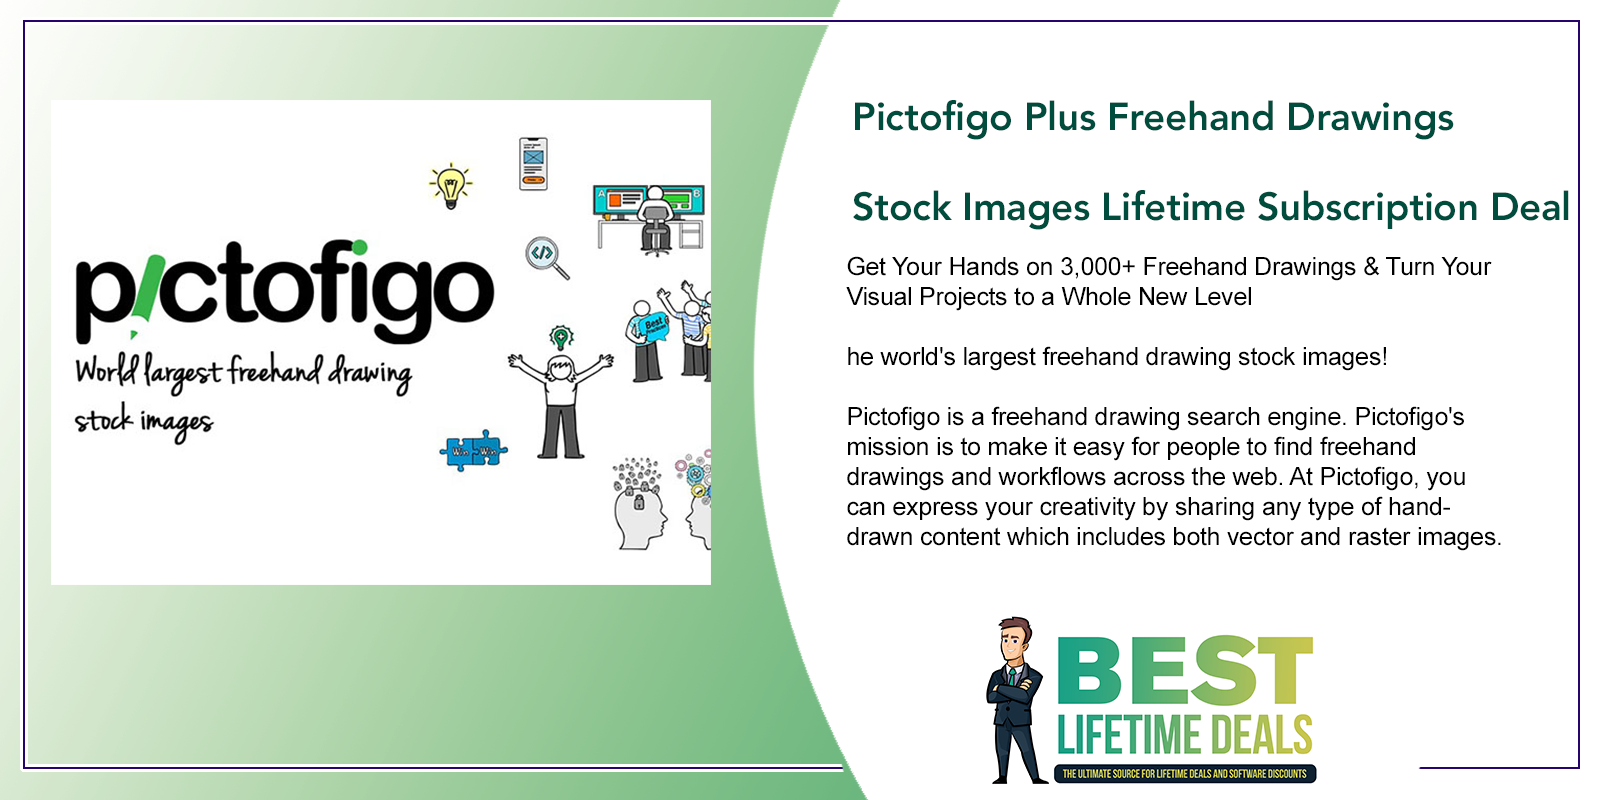 Pictofigo Plus Freehand Drawings Stock Images Lifetime Subscription Deal Featured Image